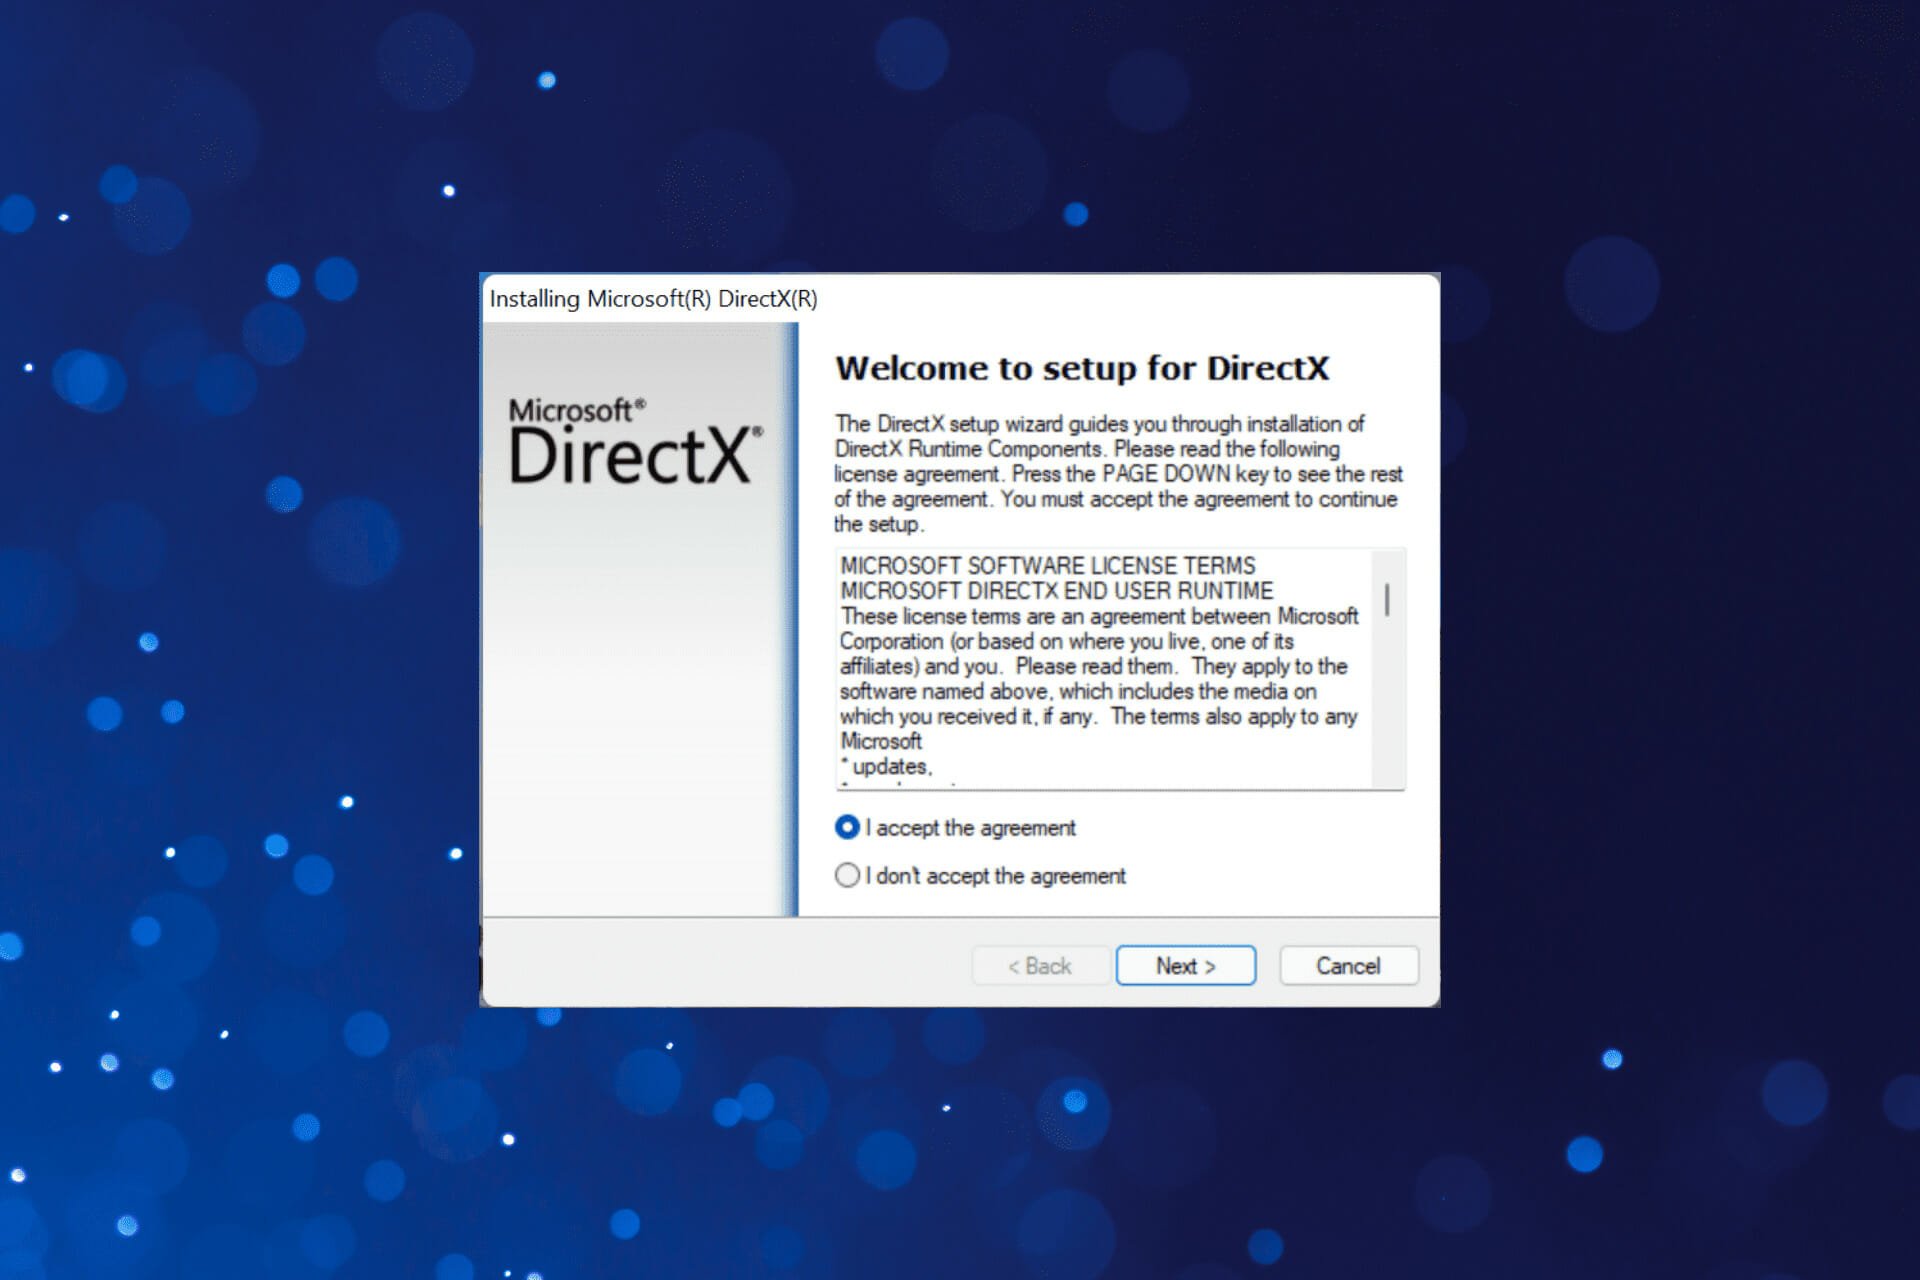 DirectX download: How to update or install DirectX on Windows 11